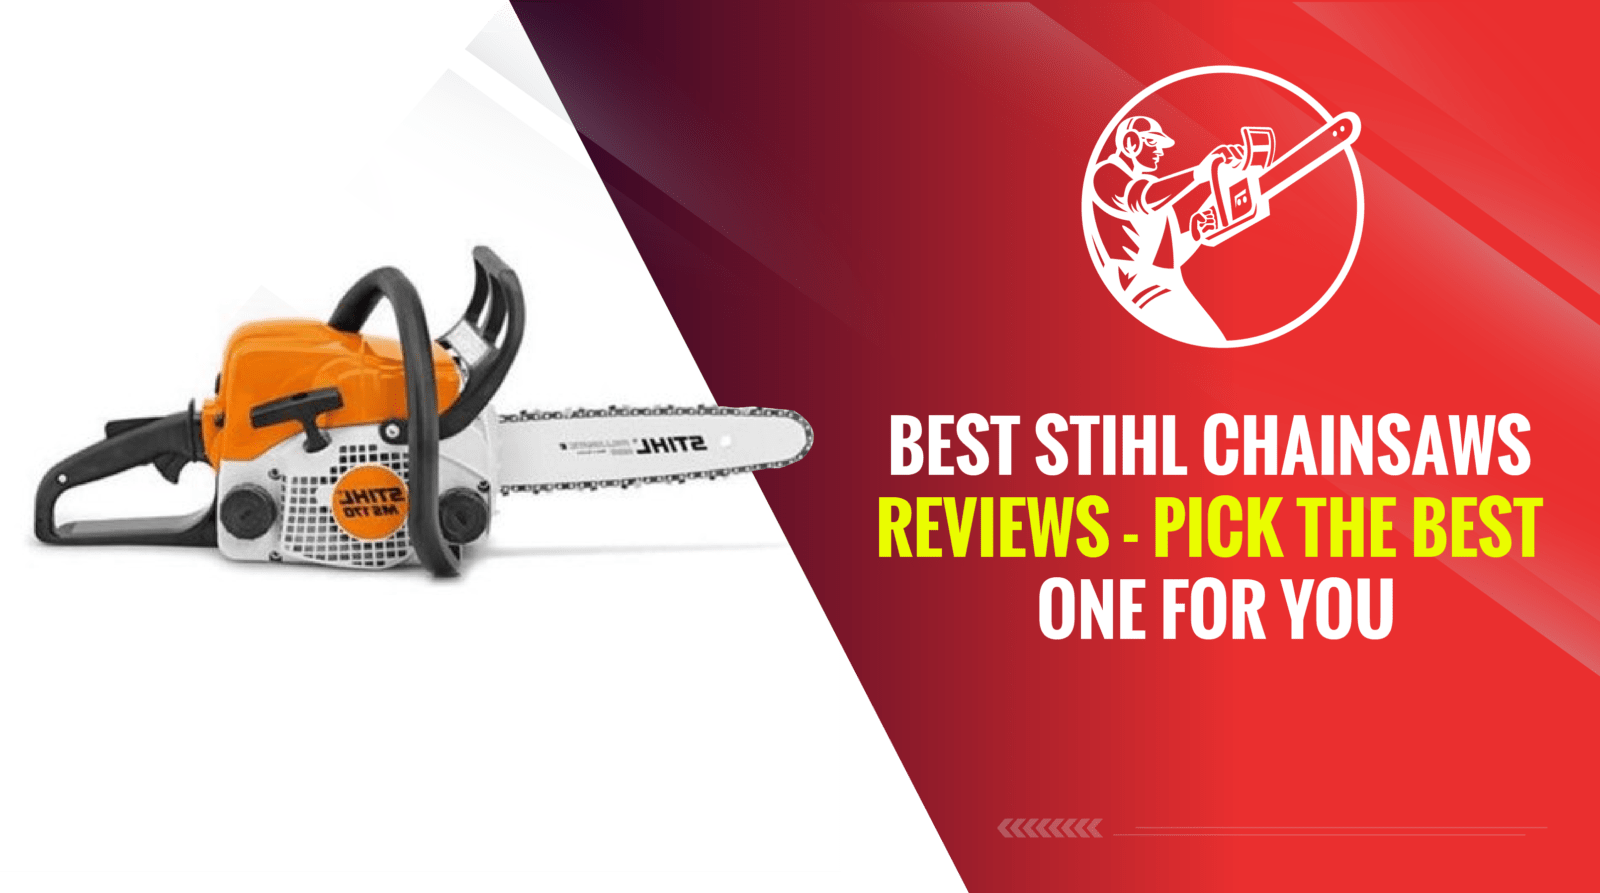 Best Stihl Chainsaws Reviews – Pick the Best One for you